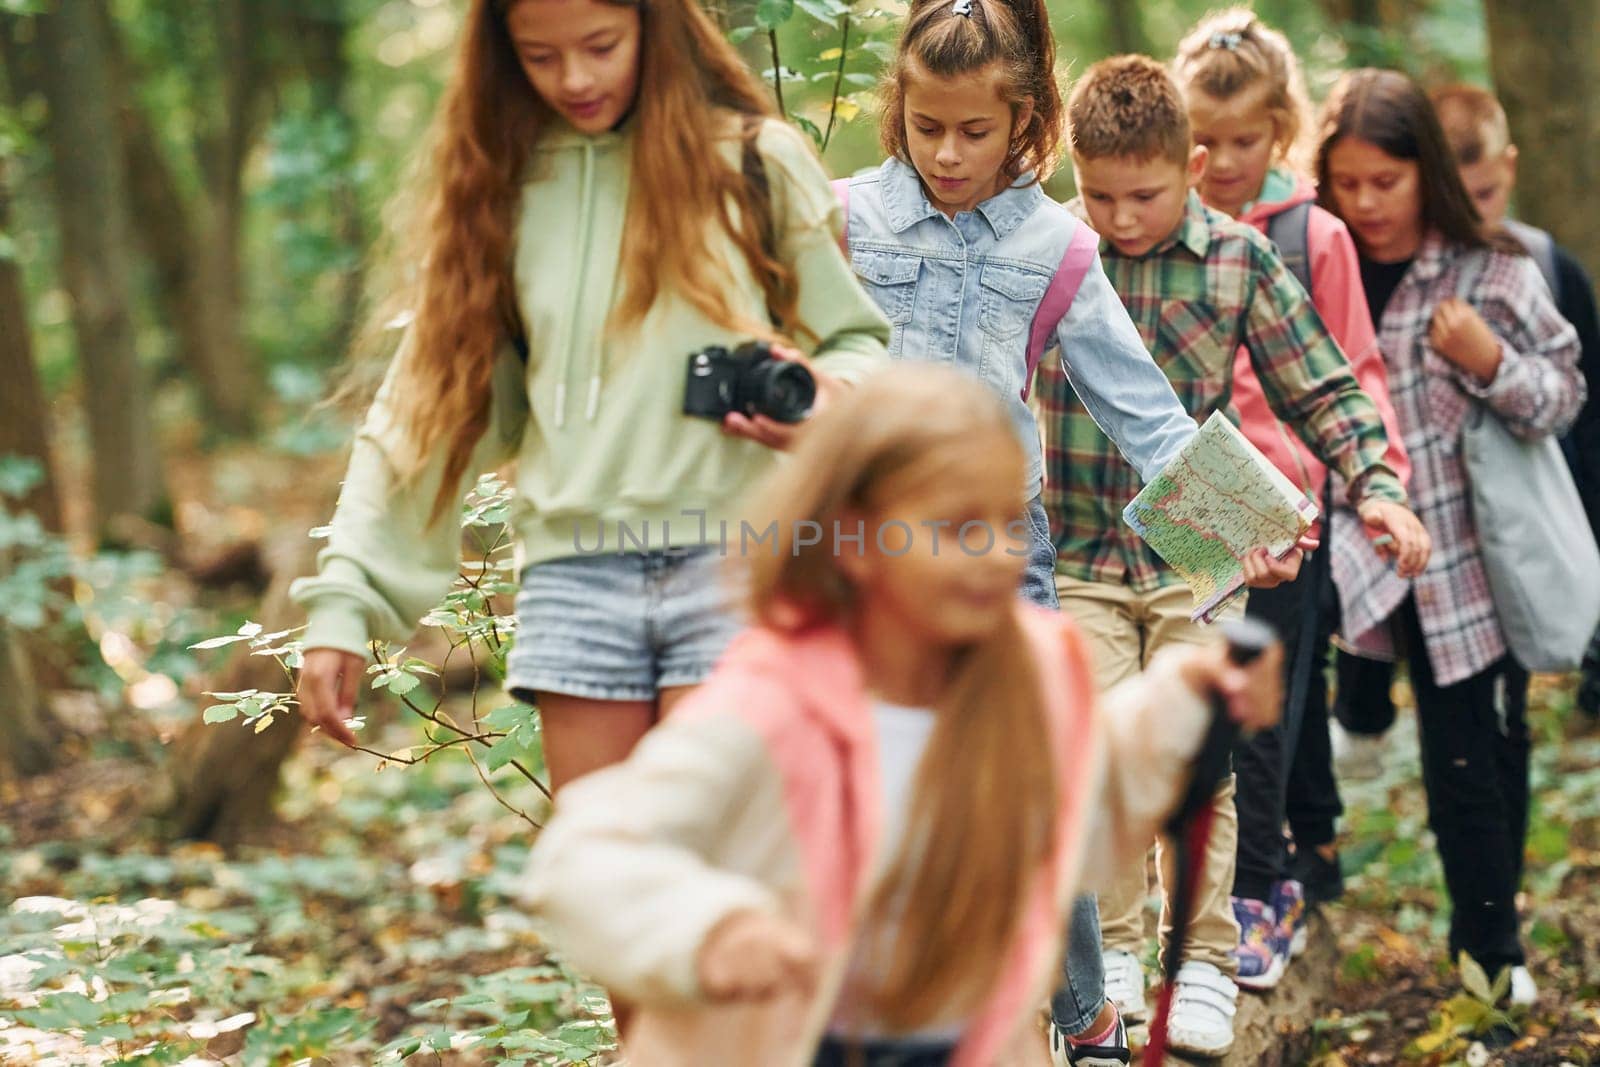 With touristic equipment. Kids in green forest at summer daytime together.